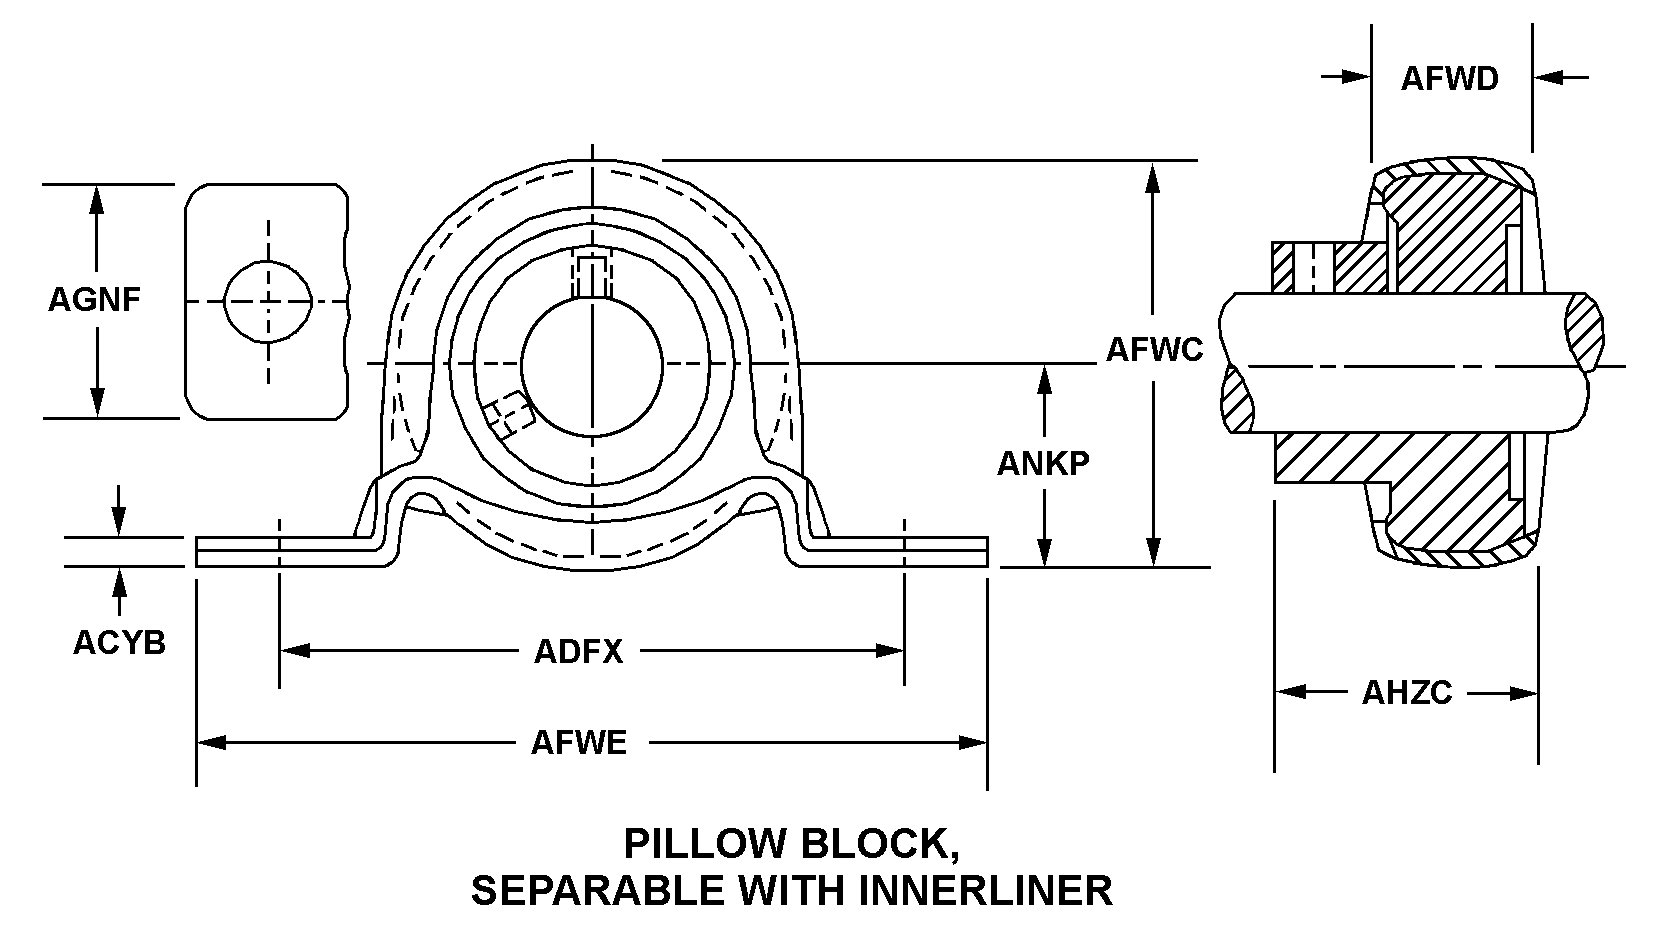 PILLOW BLOCK, SEPARABLE WITH INNERLINER style nsn 3130-01-620-3001